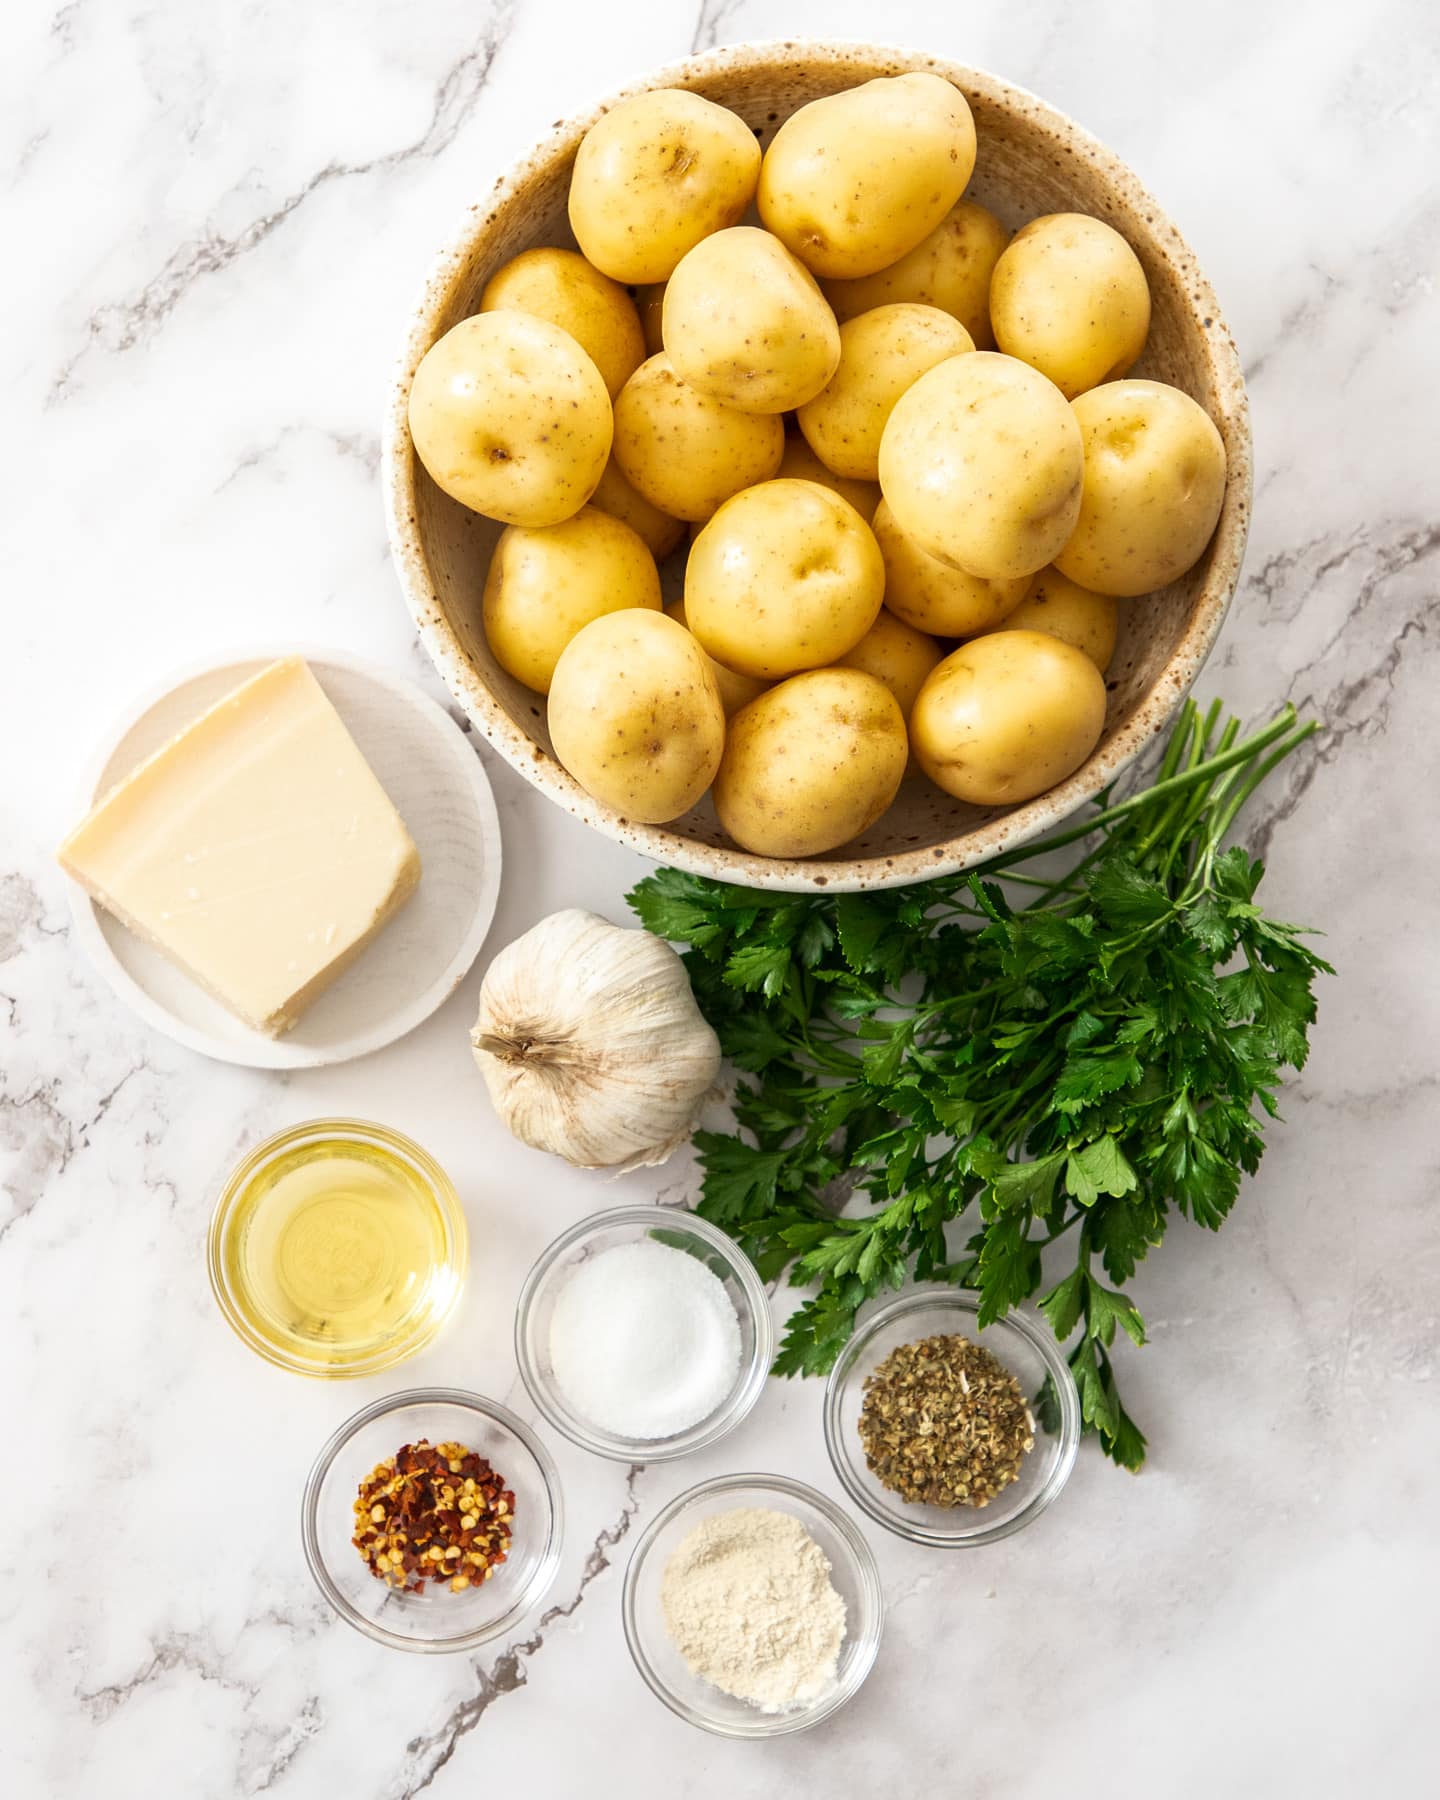 Ingredients for roasted parmesan garlic potatoes on a marble surface.